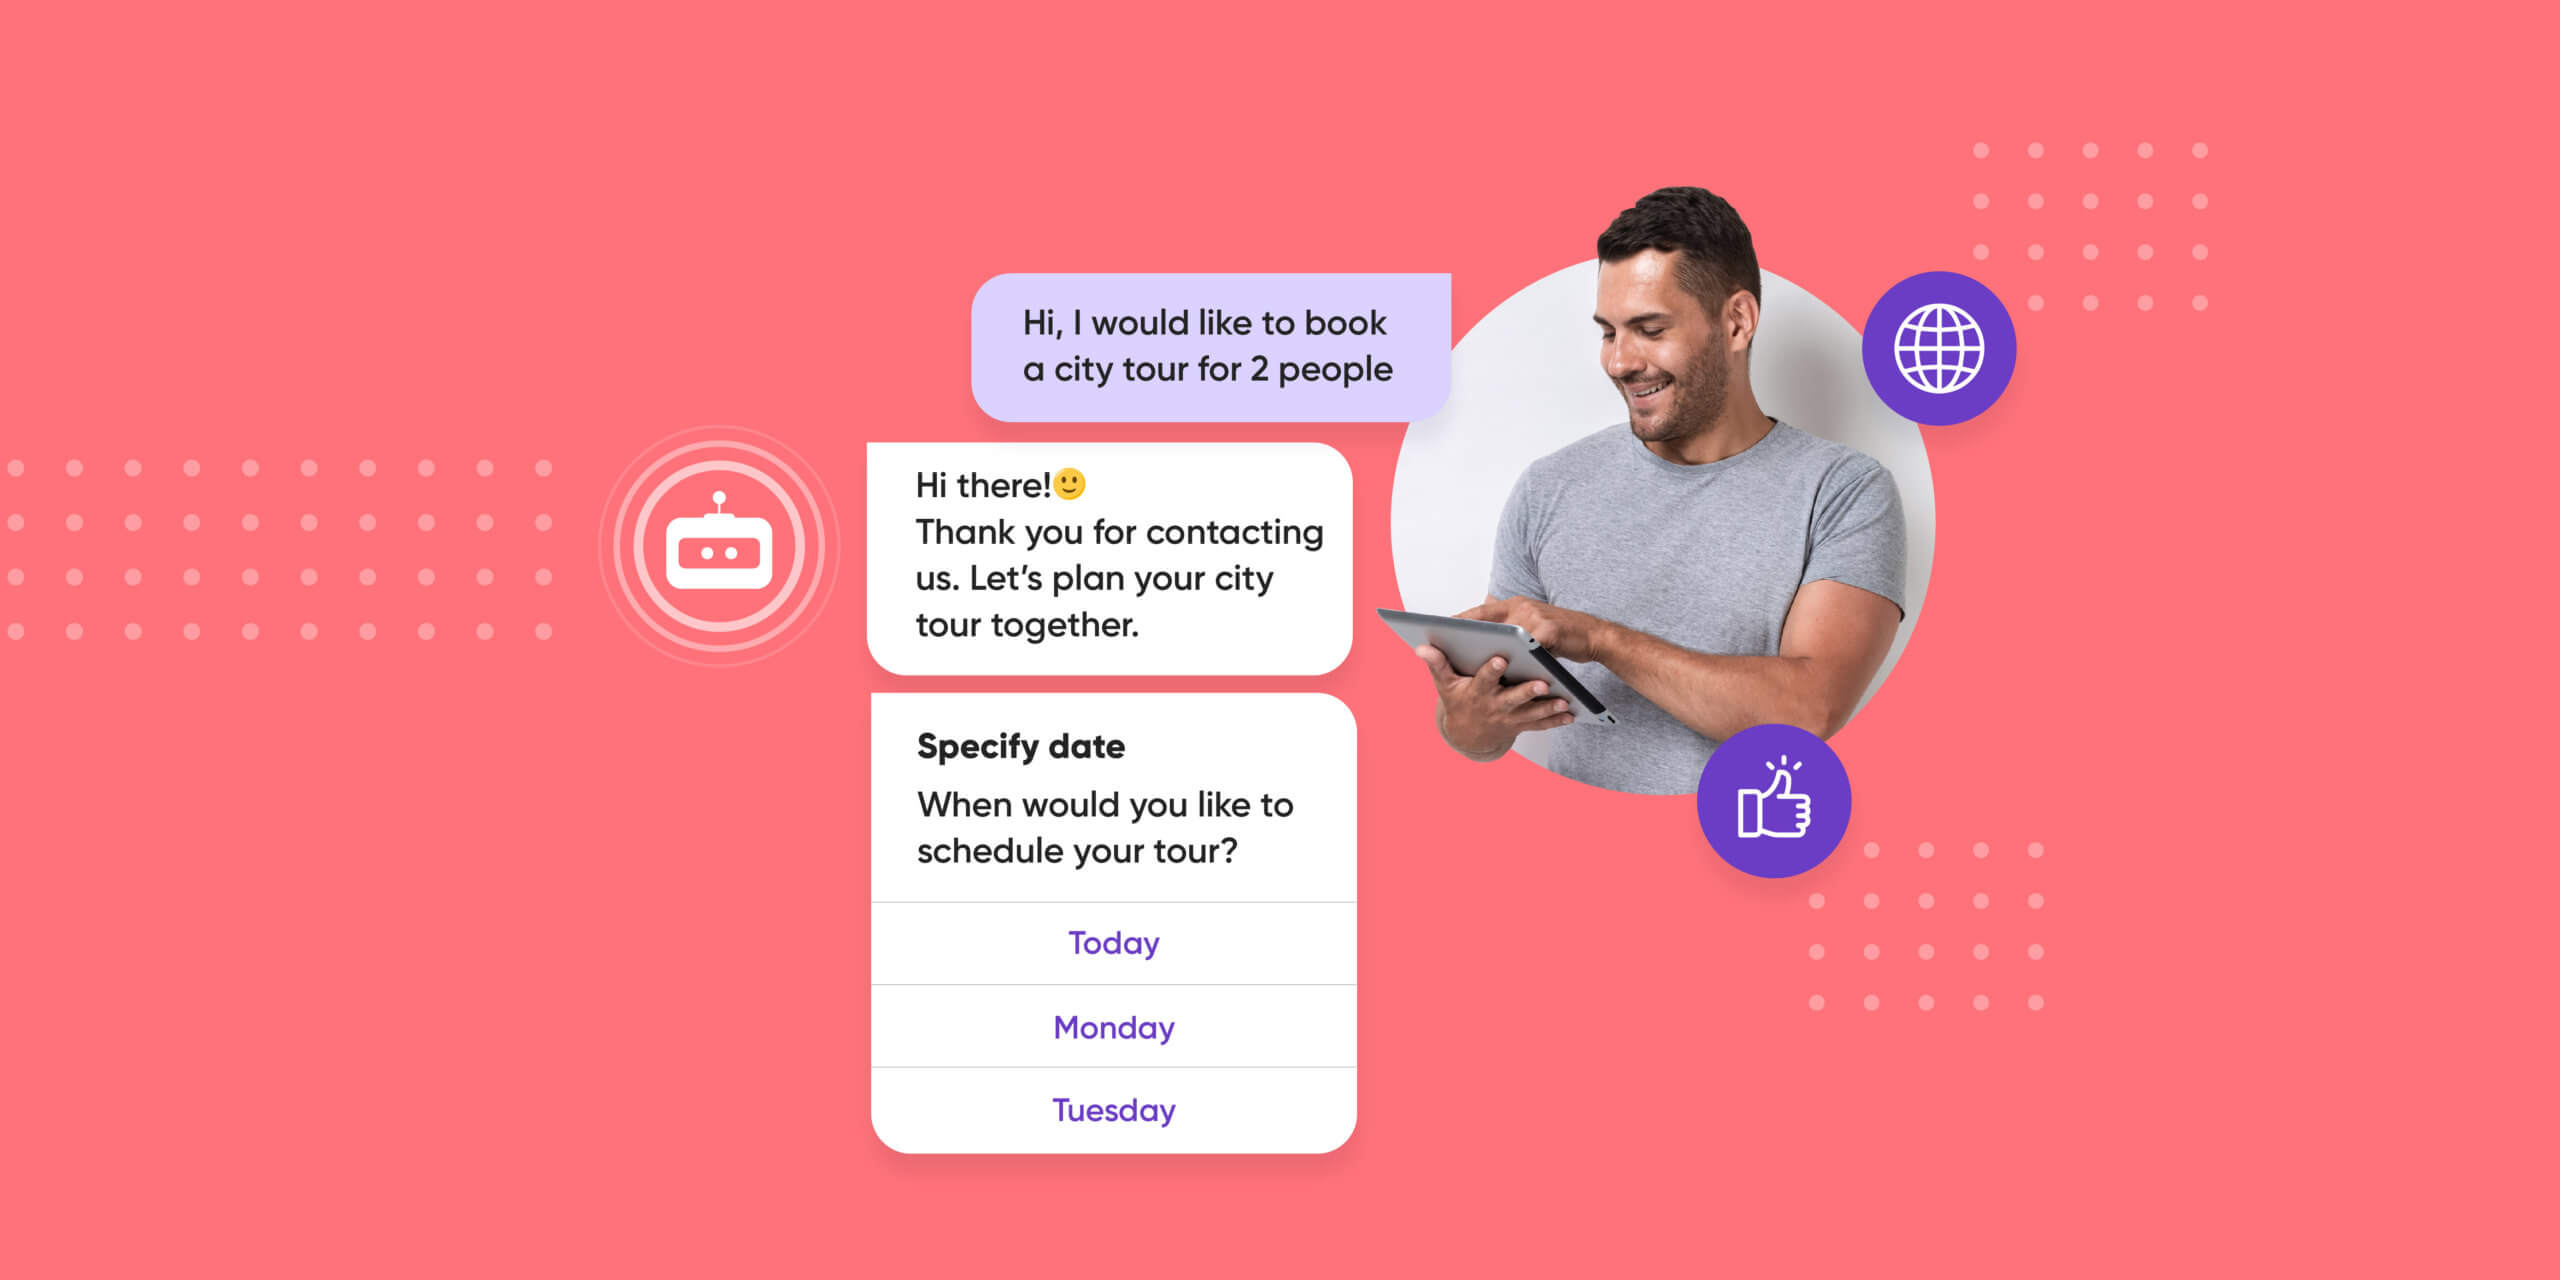 The Complete Guide to Chatbots for Marketing | Advanced Chatbot Features for Marketers